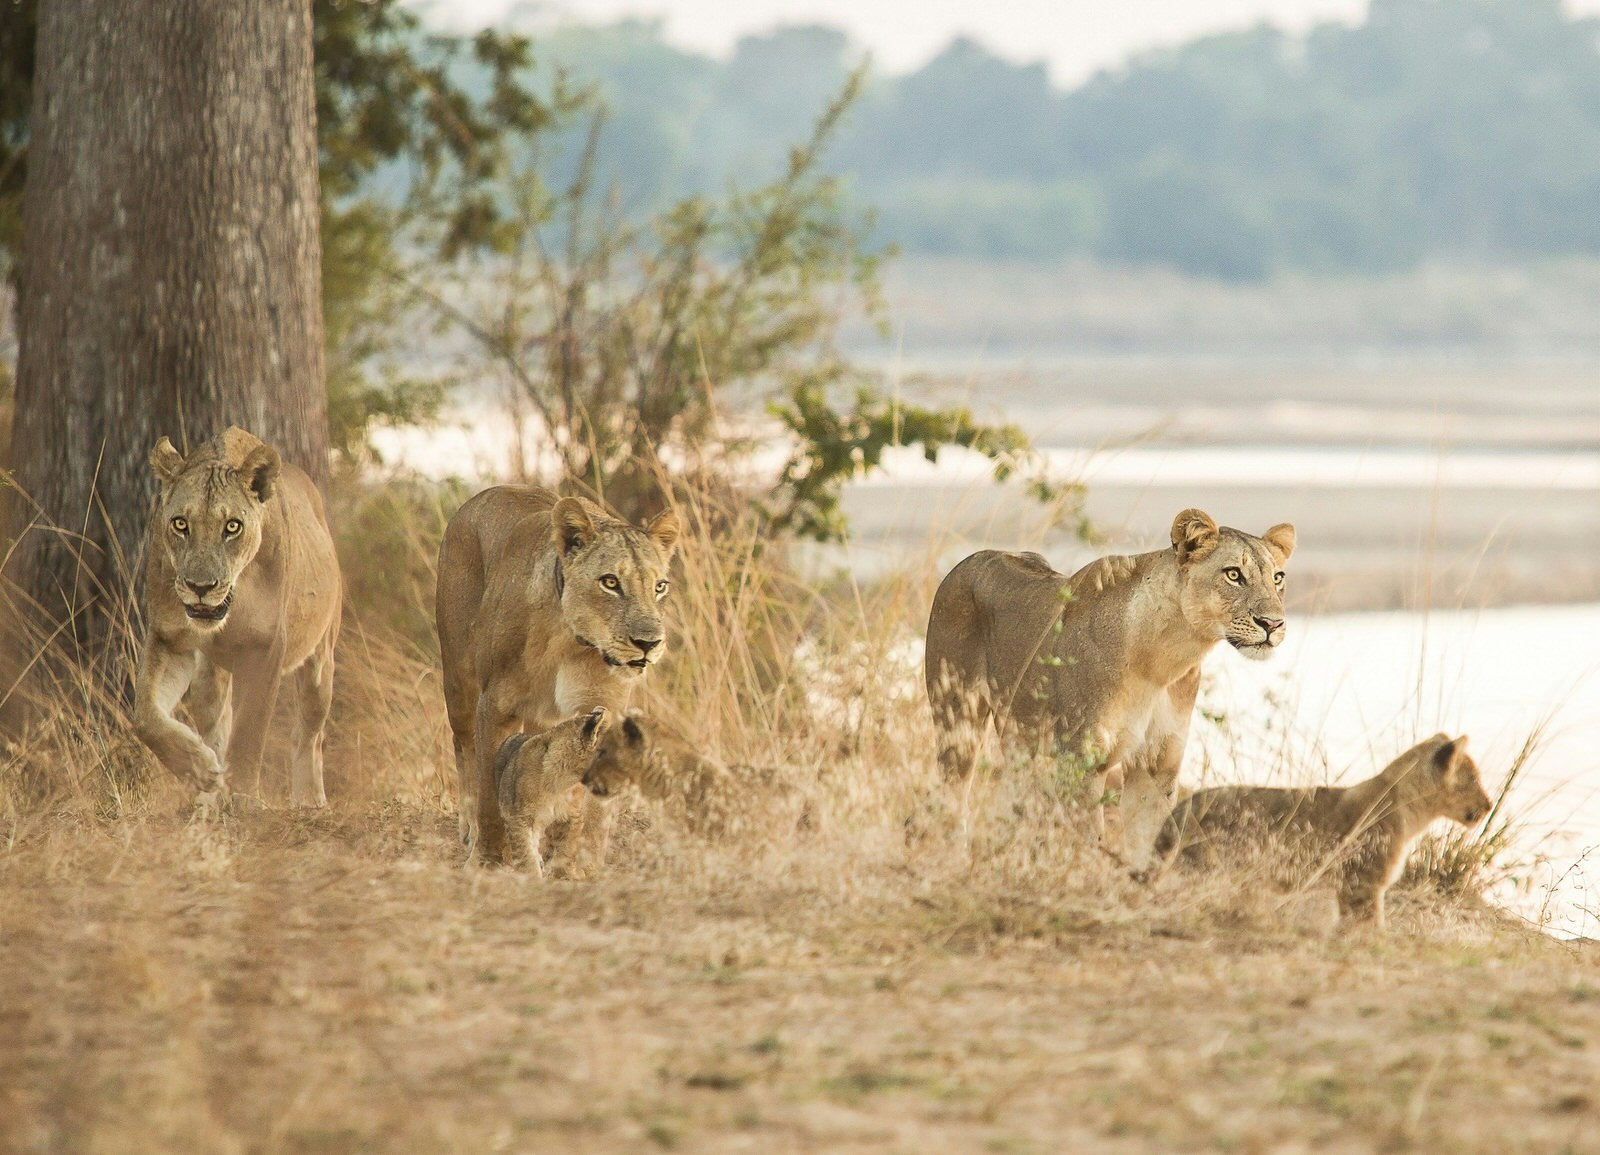 Lionesses of the Mfuwe pride with their cubs, watching a lion being chased by crocodiles in the river below © Philip Lee Harvey